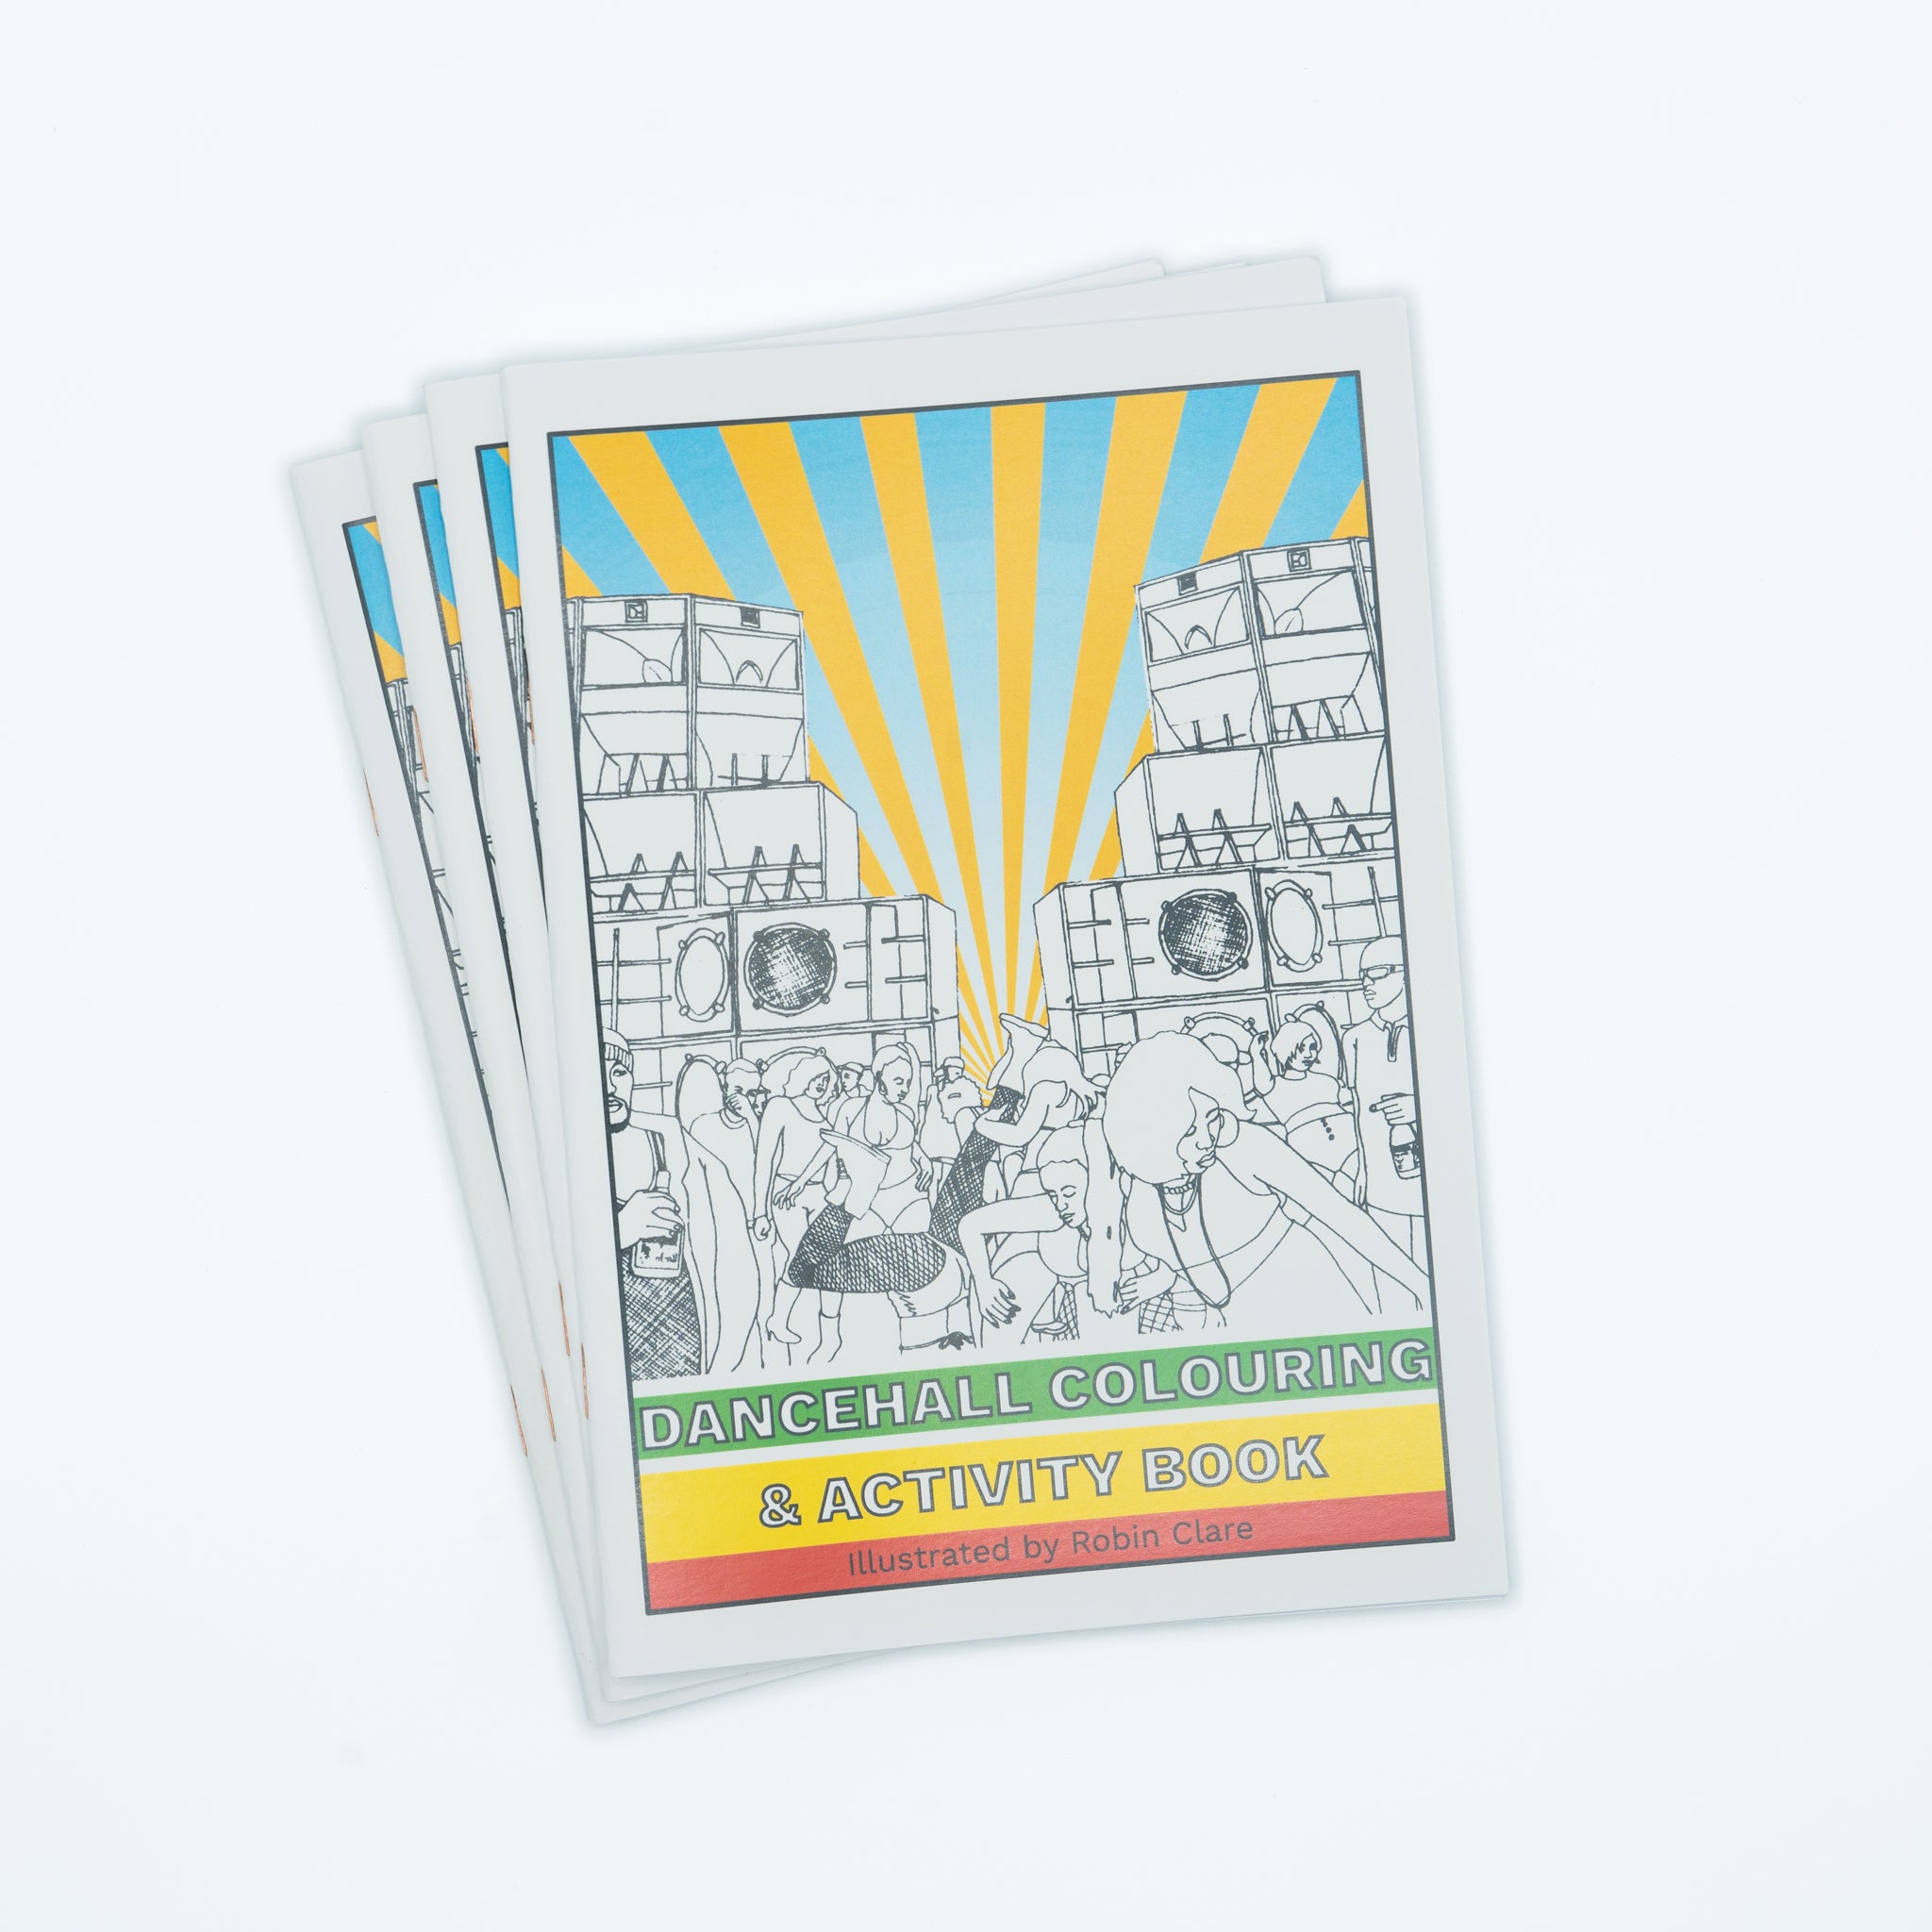 The Dancehall Colouring & Activity Book from Robin Clare